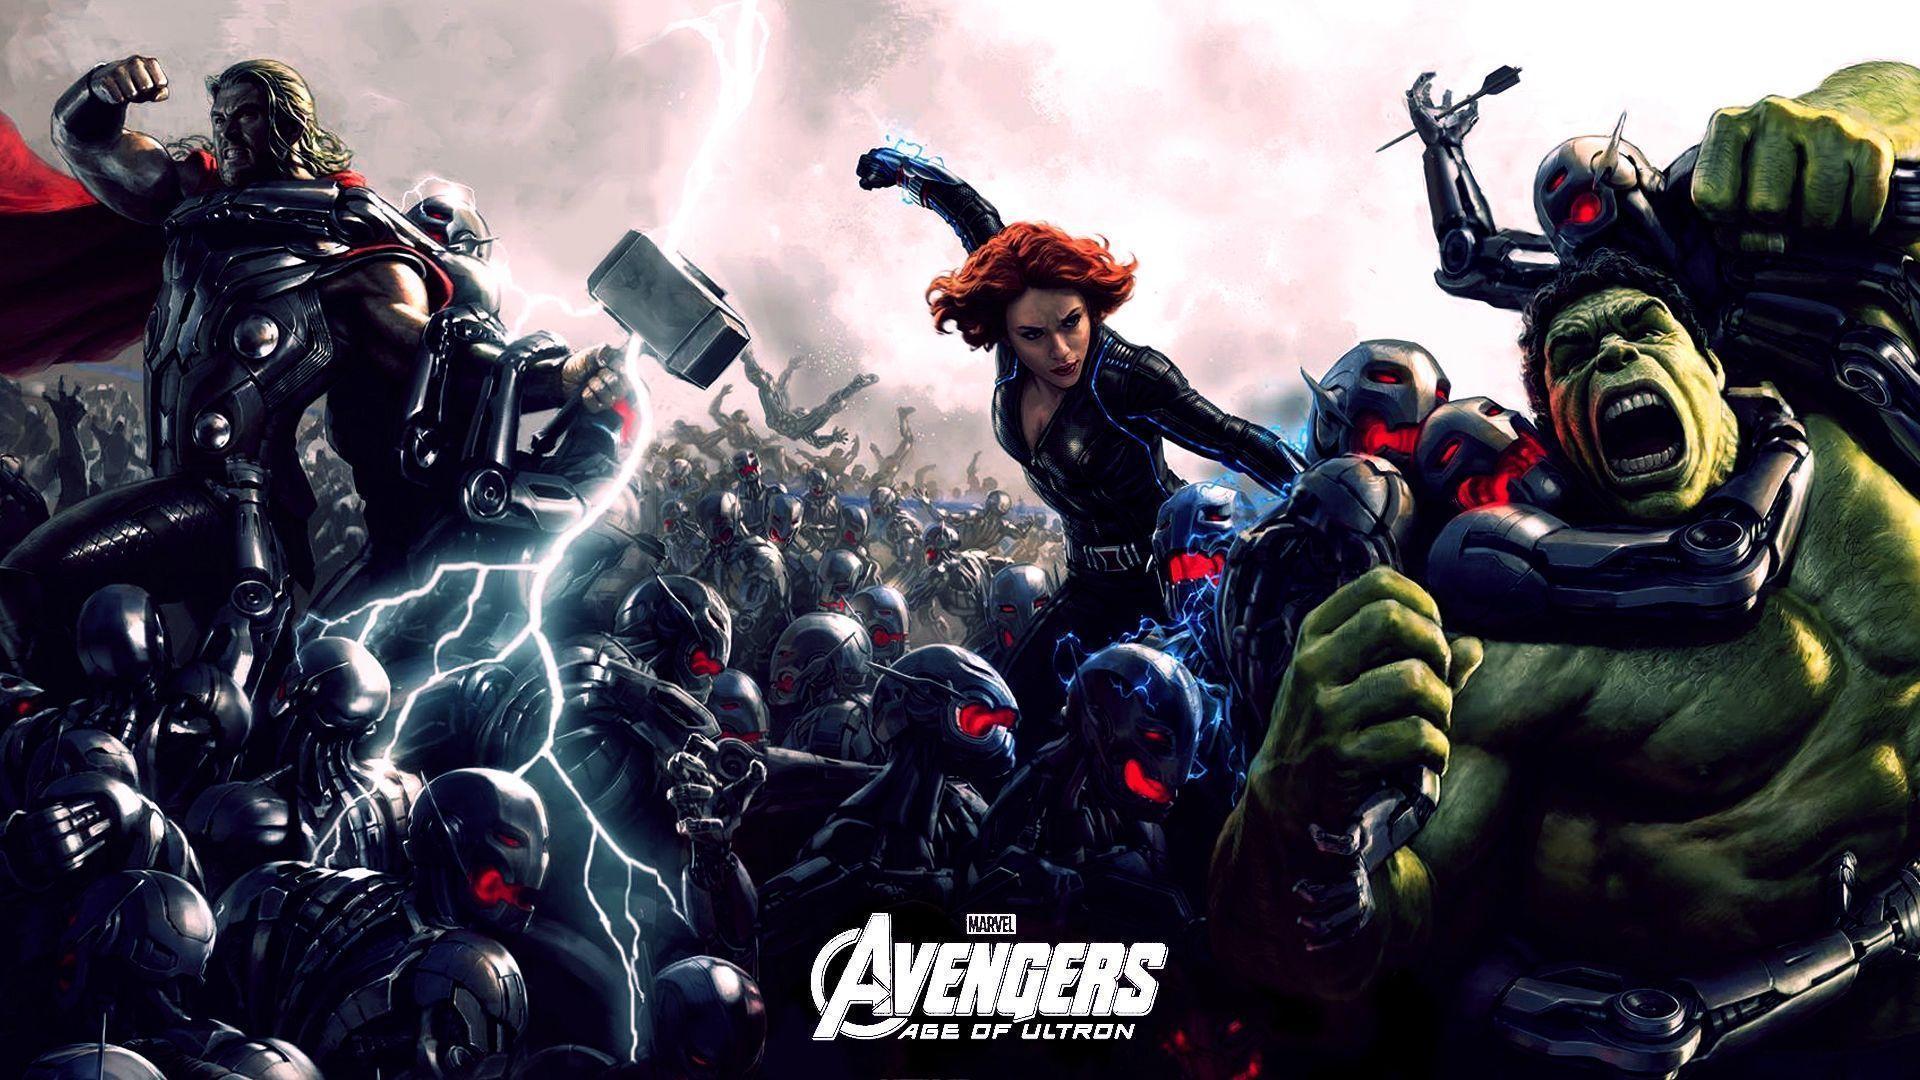 Avengers 2 HD Wallpaper, Picture, Image 1366x768